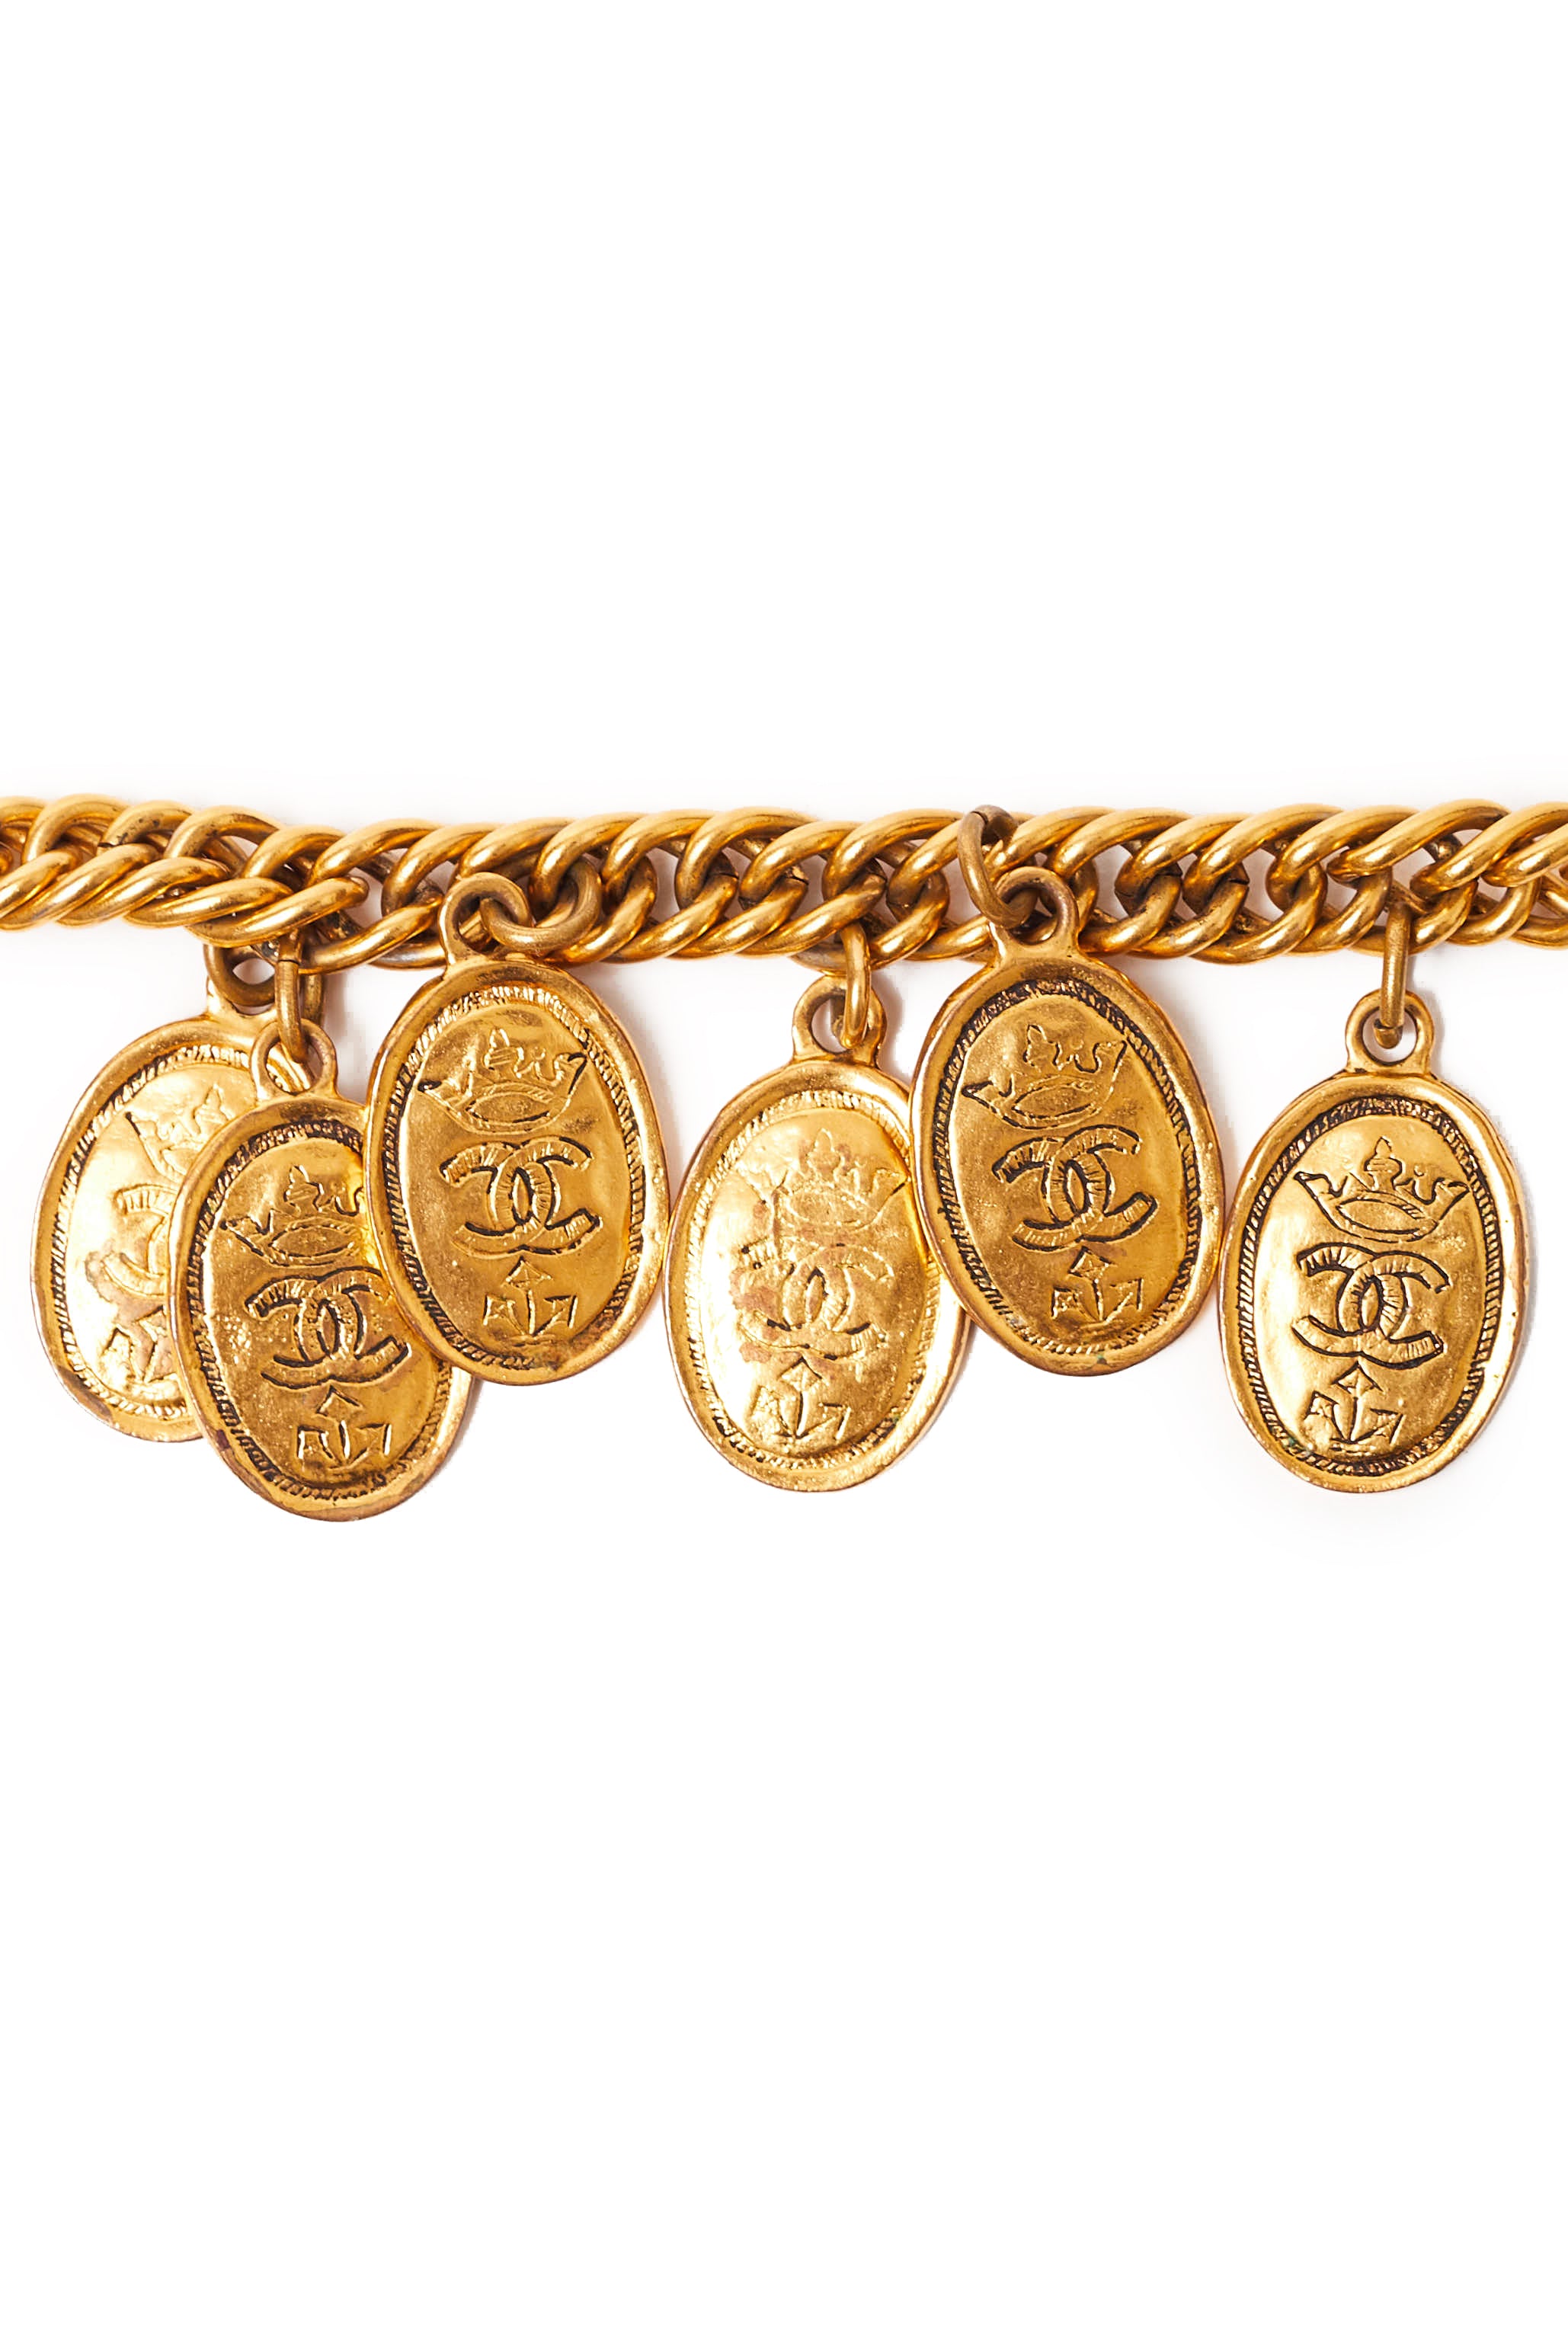 Chanel <br> 1980's gold plated CC crown logo coin charm bracelet